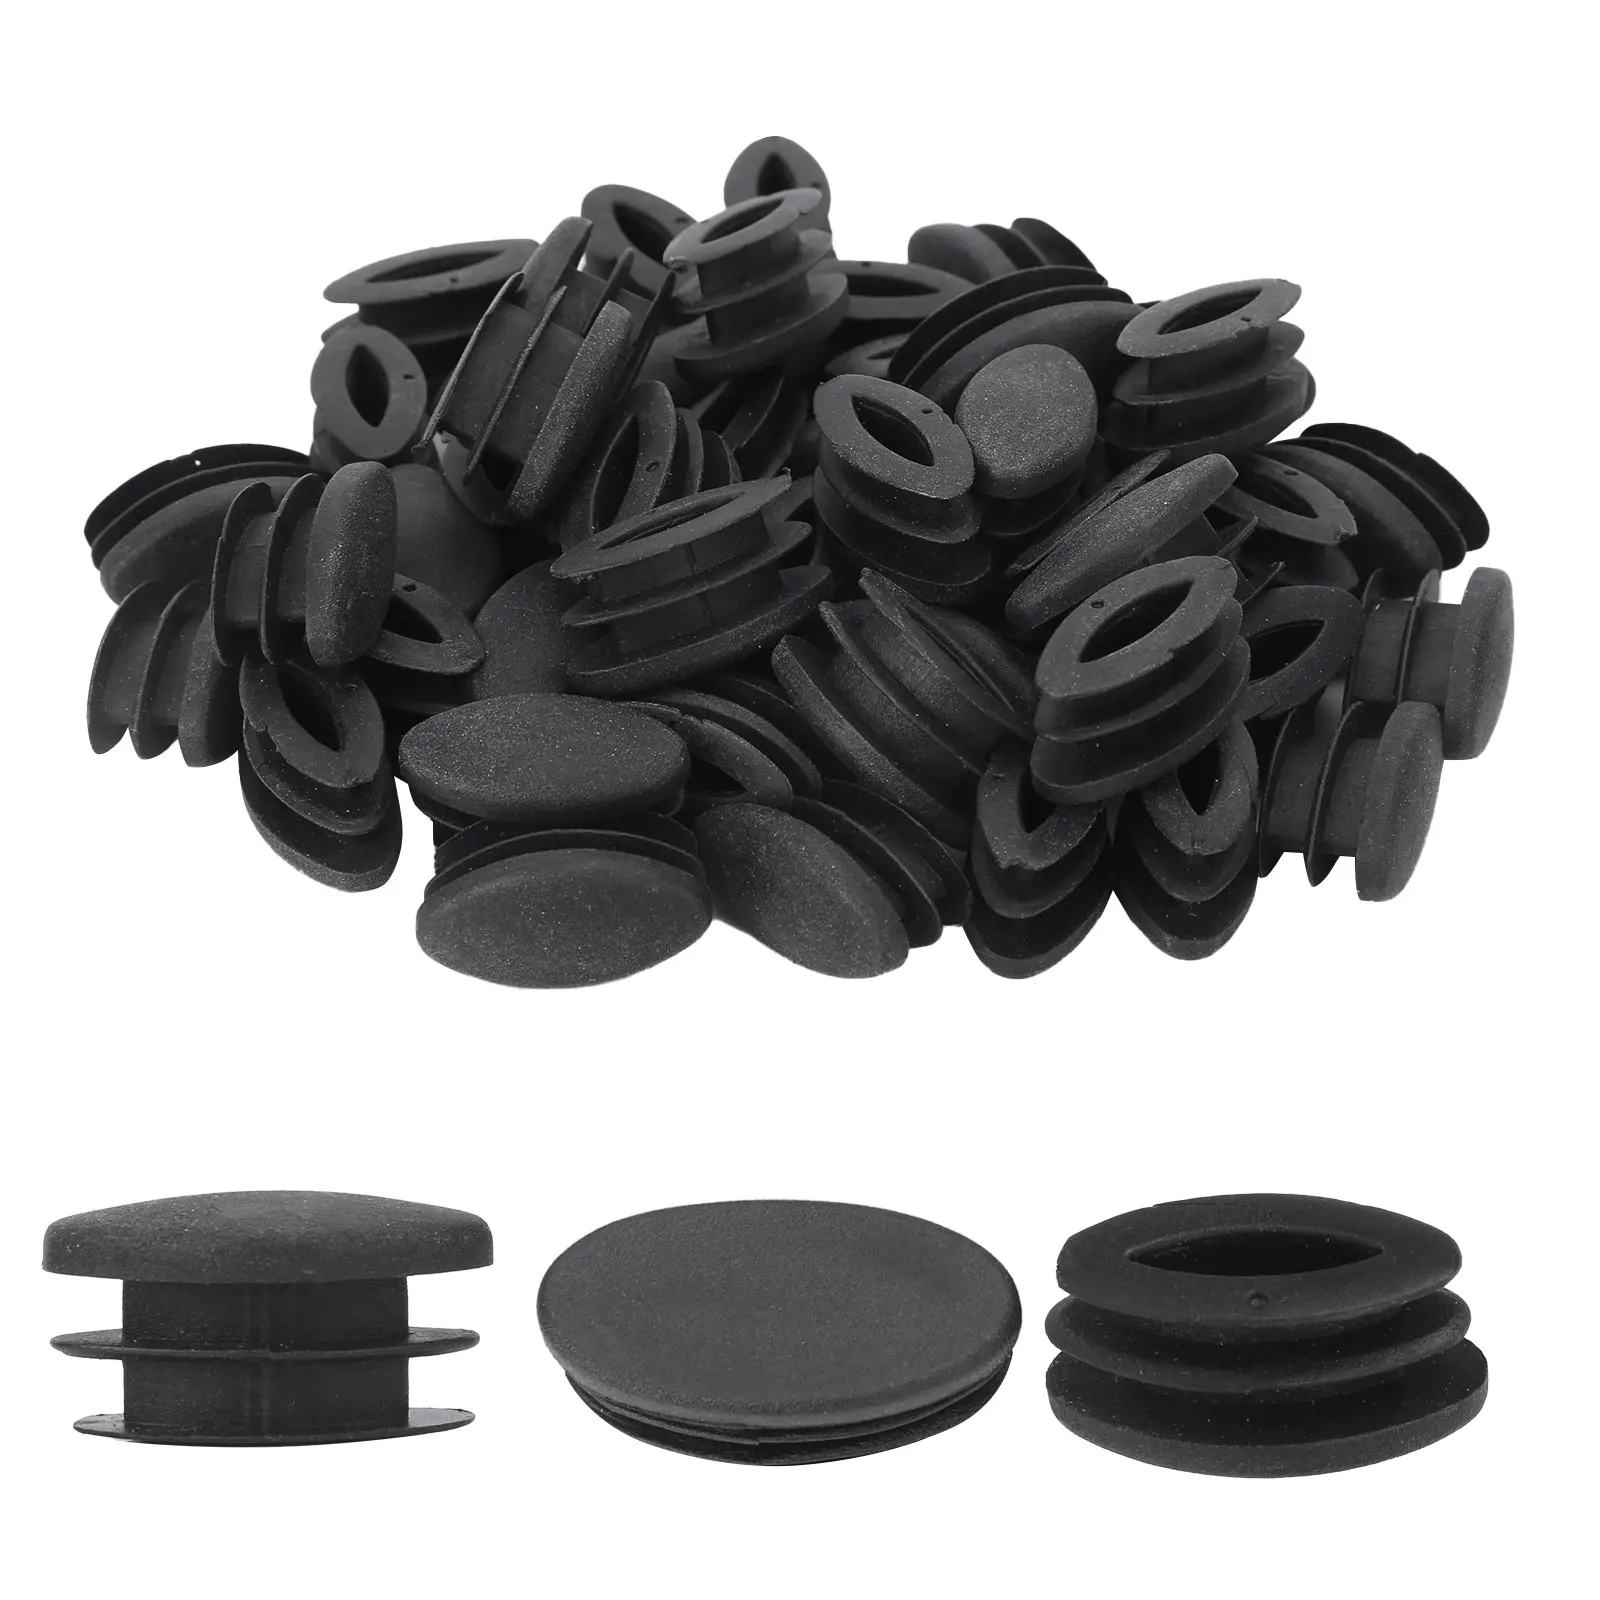 50pc Plastic Furniture Table Chair Leg End Caps Covers Round / Olive Steel Pipe Tube End Caps Insert Plugs Tips Floor Protectors